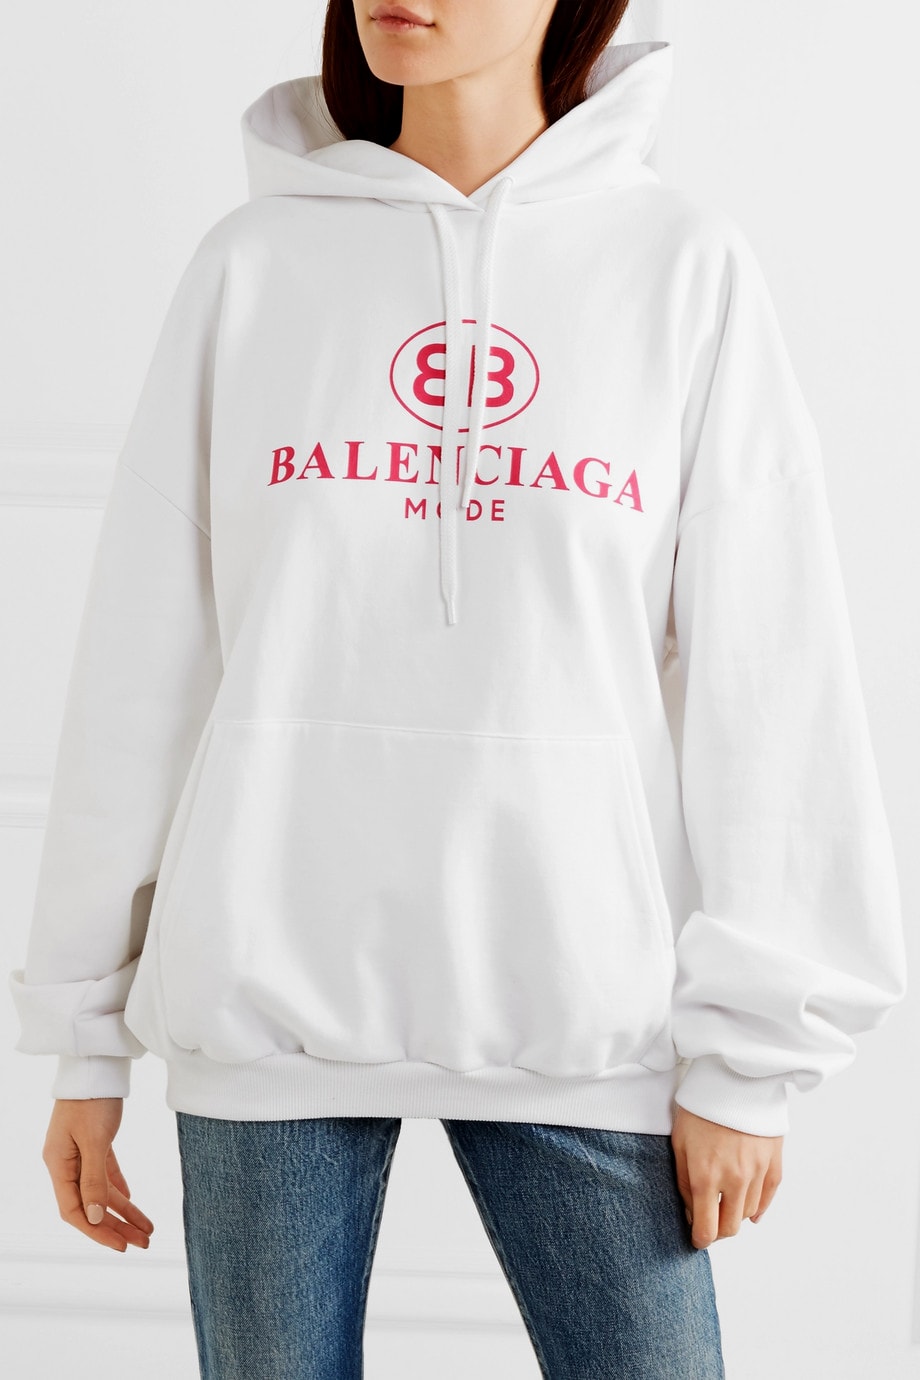 Balenciaga Oversized Printed Hoodie White Front View